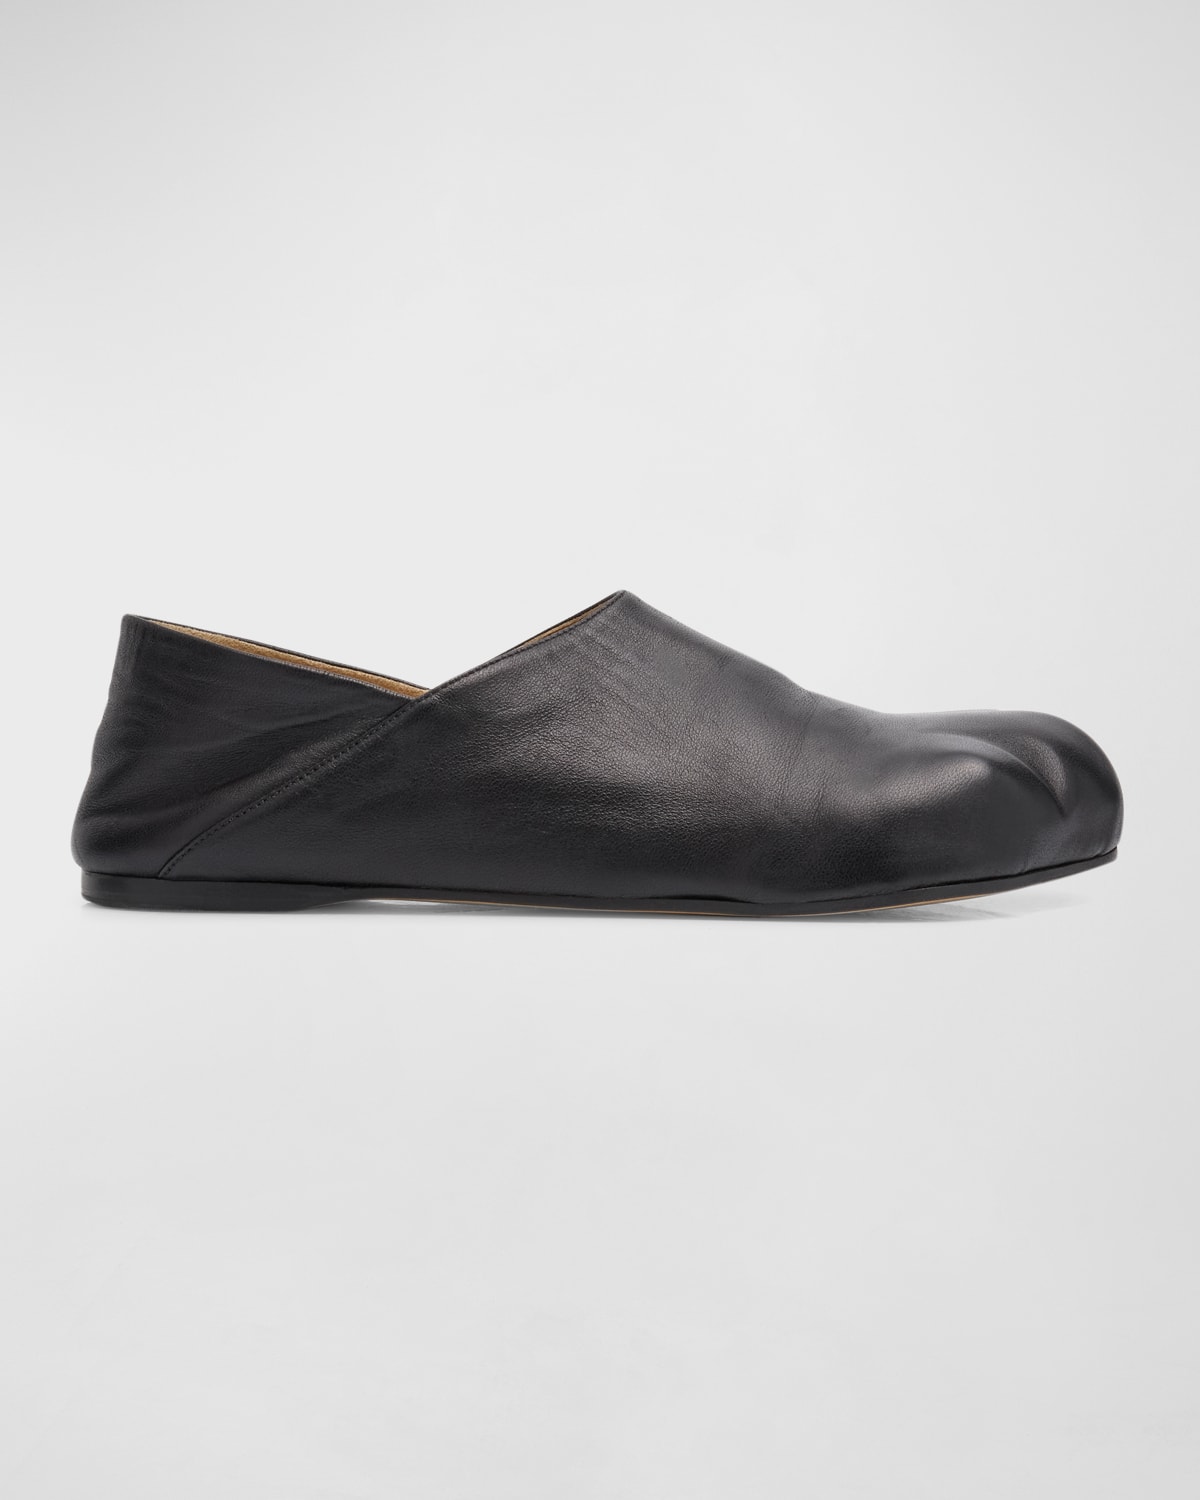 Men's Paw Leather Slipper Loafers